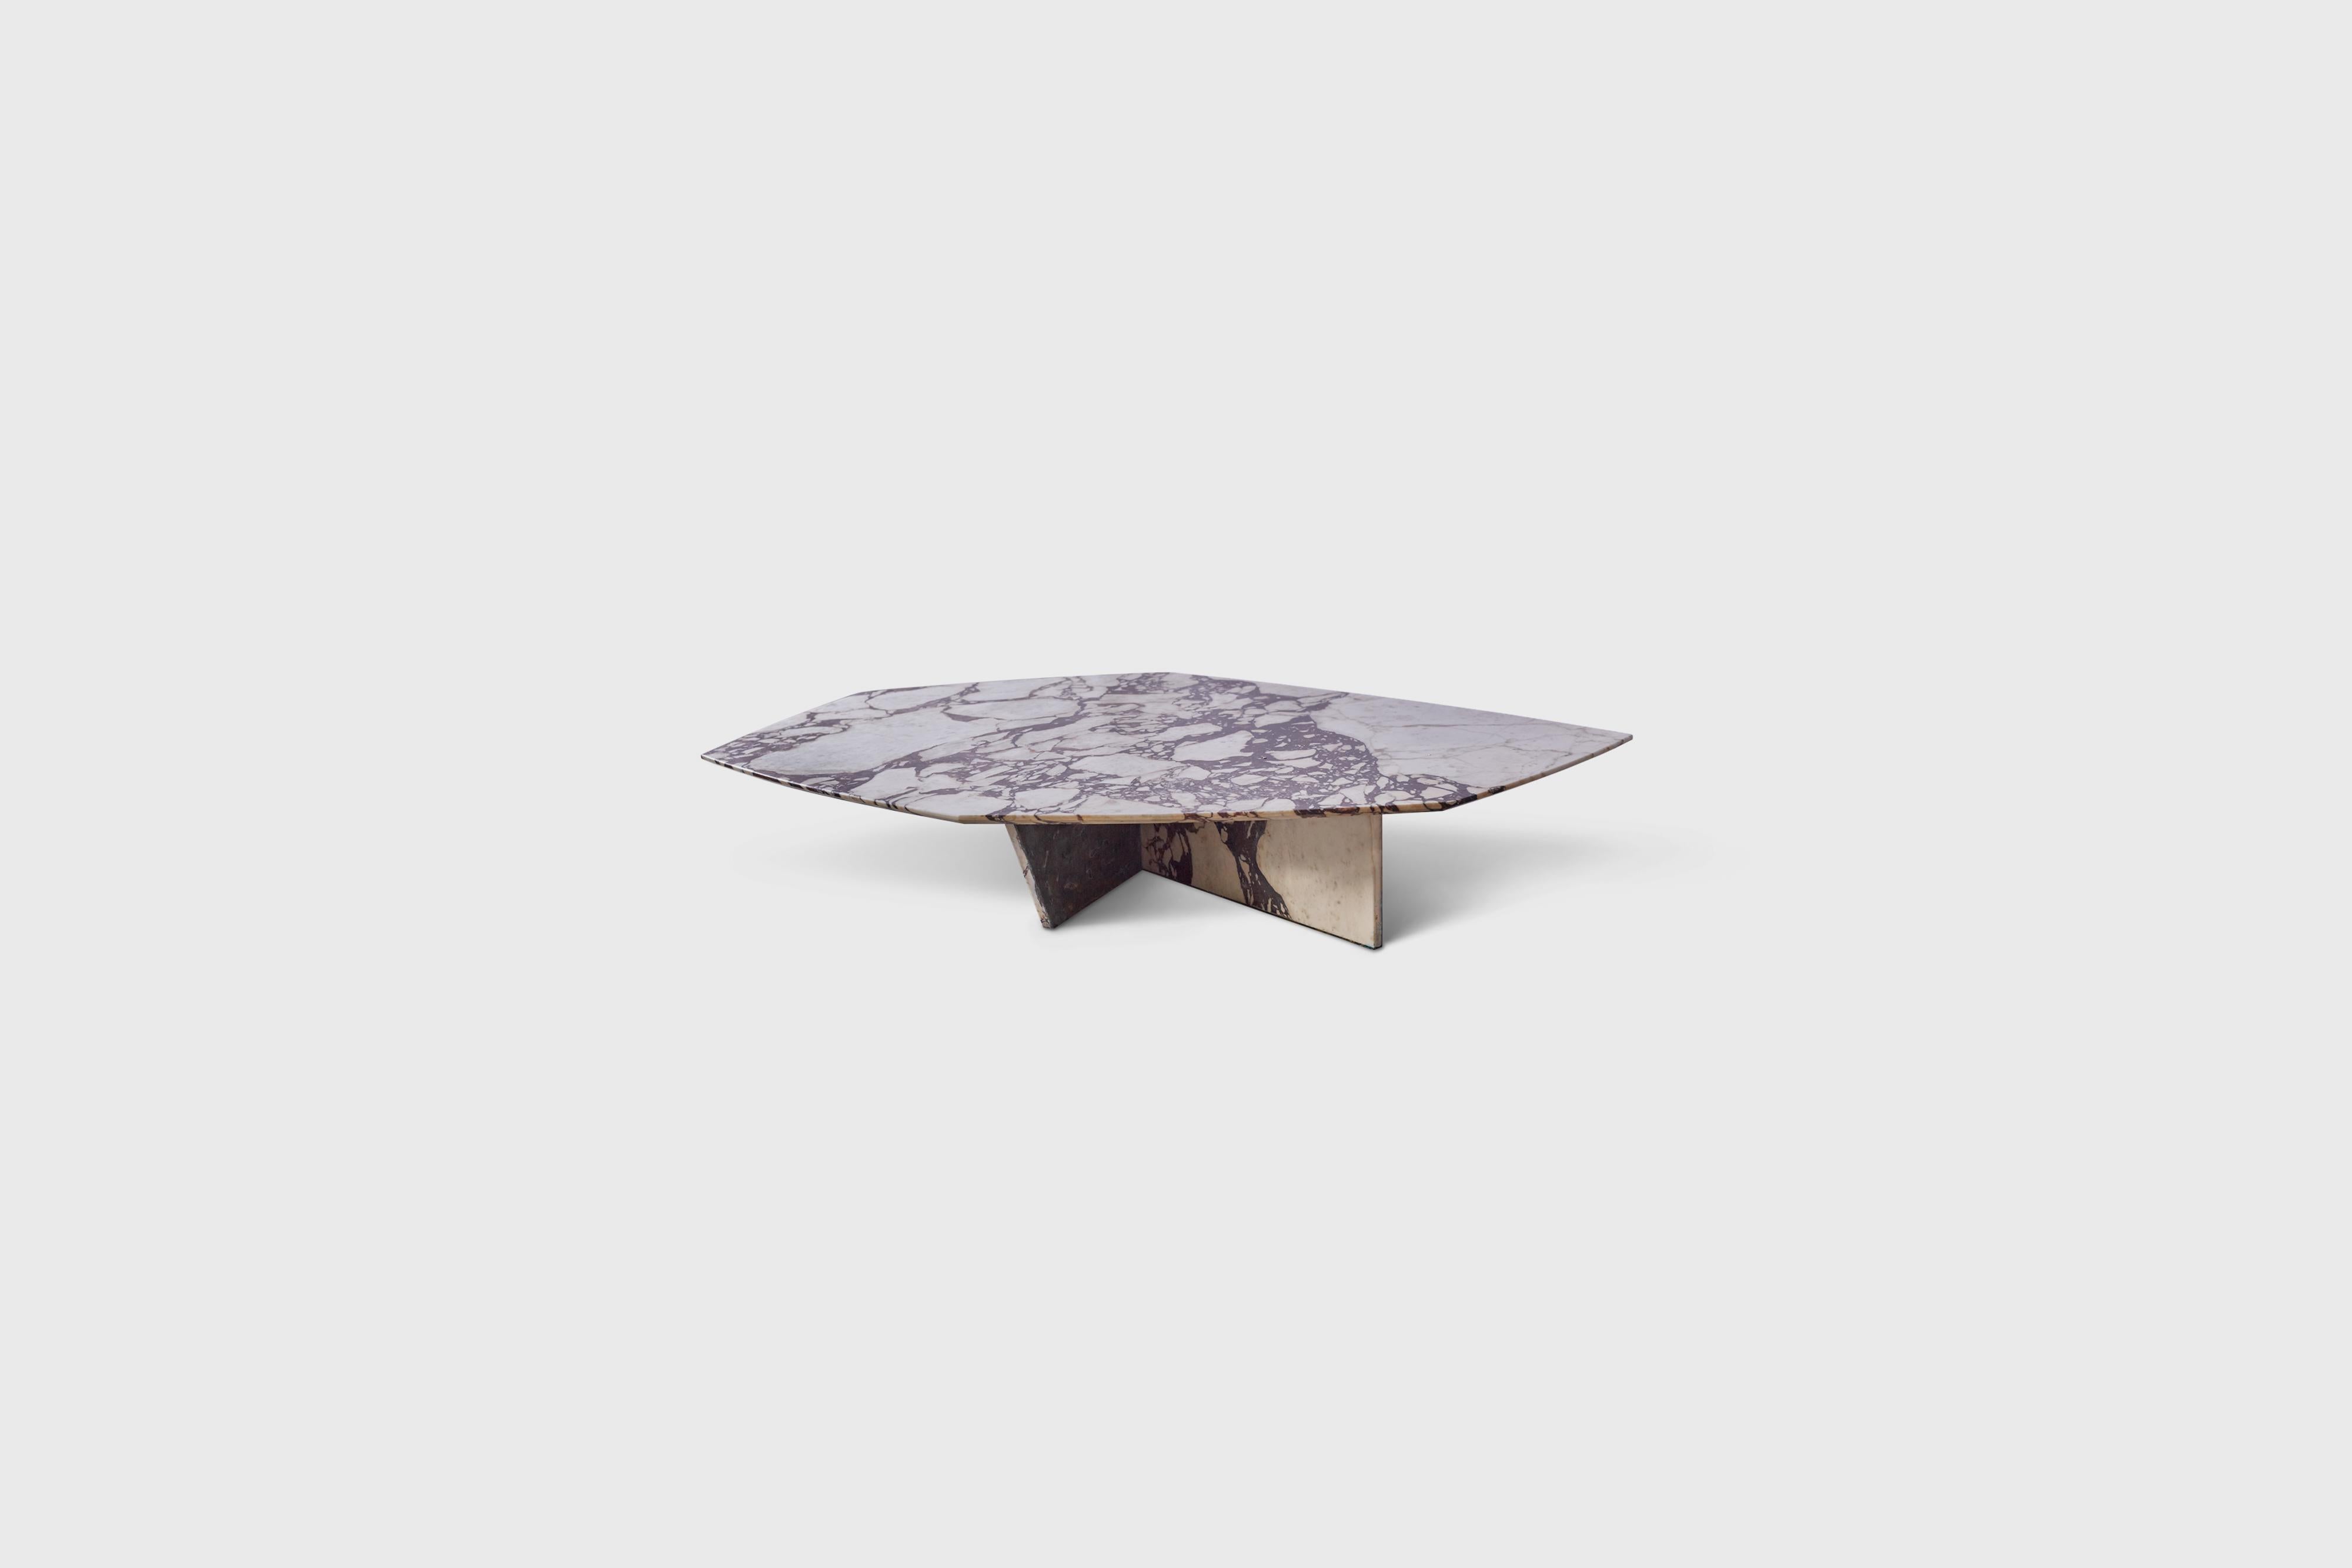 Geometrik Calacatta Viola Medium Coffee Table by Atra Design
Dimensions: D 120 x W 160 x H 32 cm.
Materials: Calacatta Viola marble and cladded steel.

Available in three sizes. Different marble options available: Verde Tikal, Negro Monterrey,